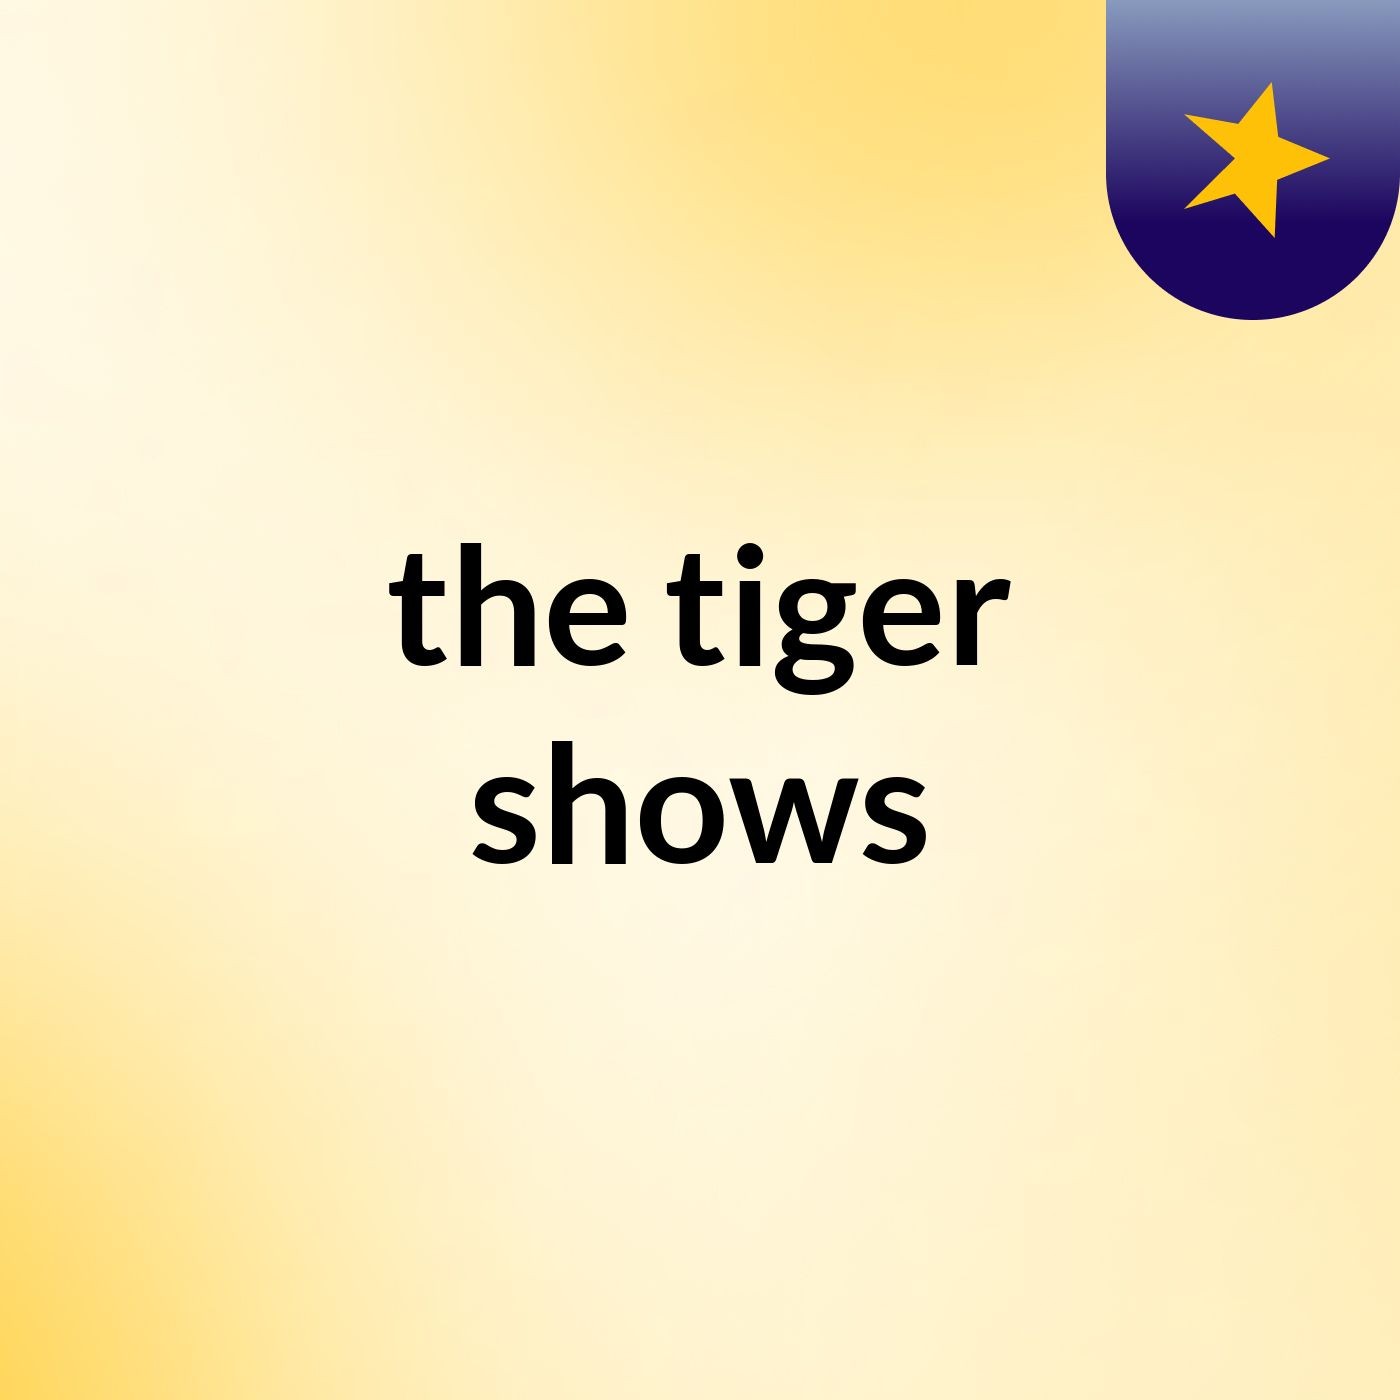 the tiger shows